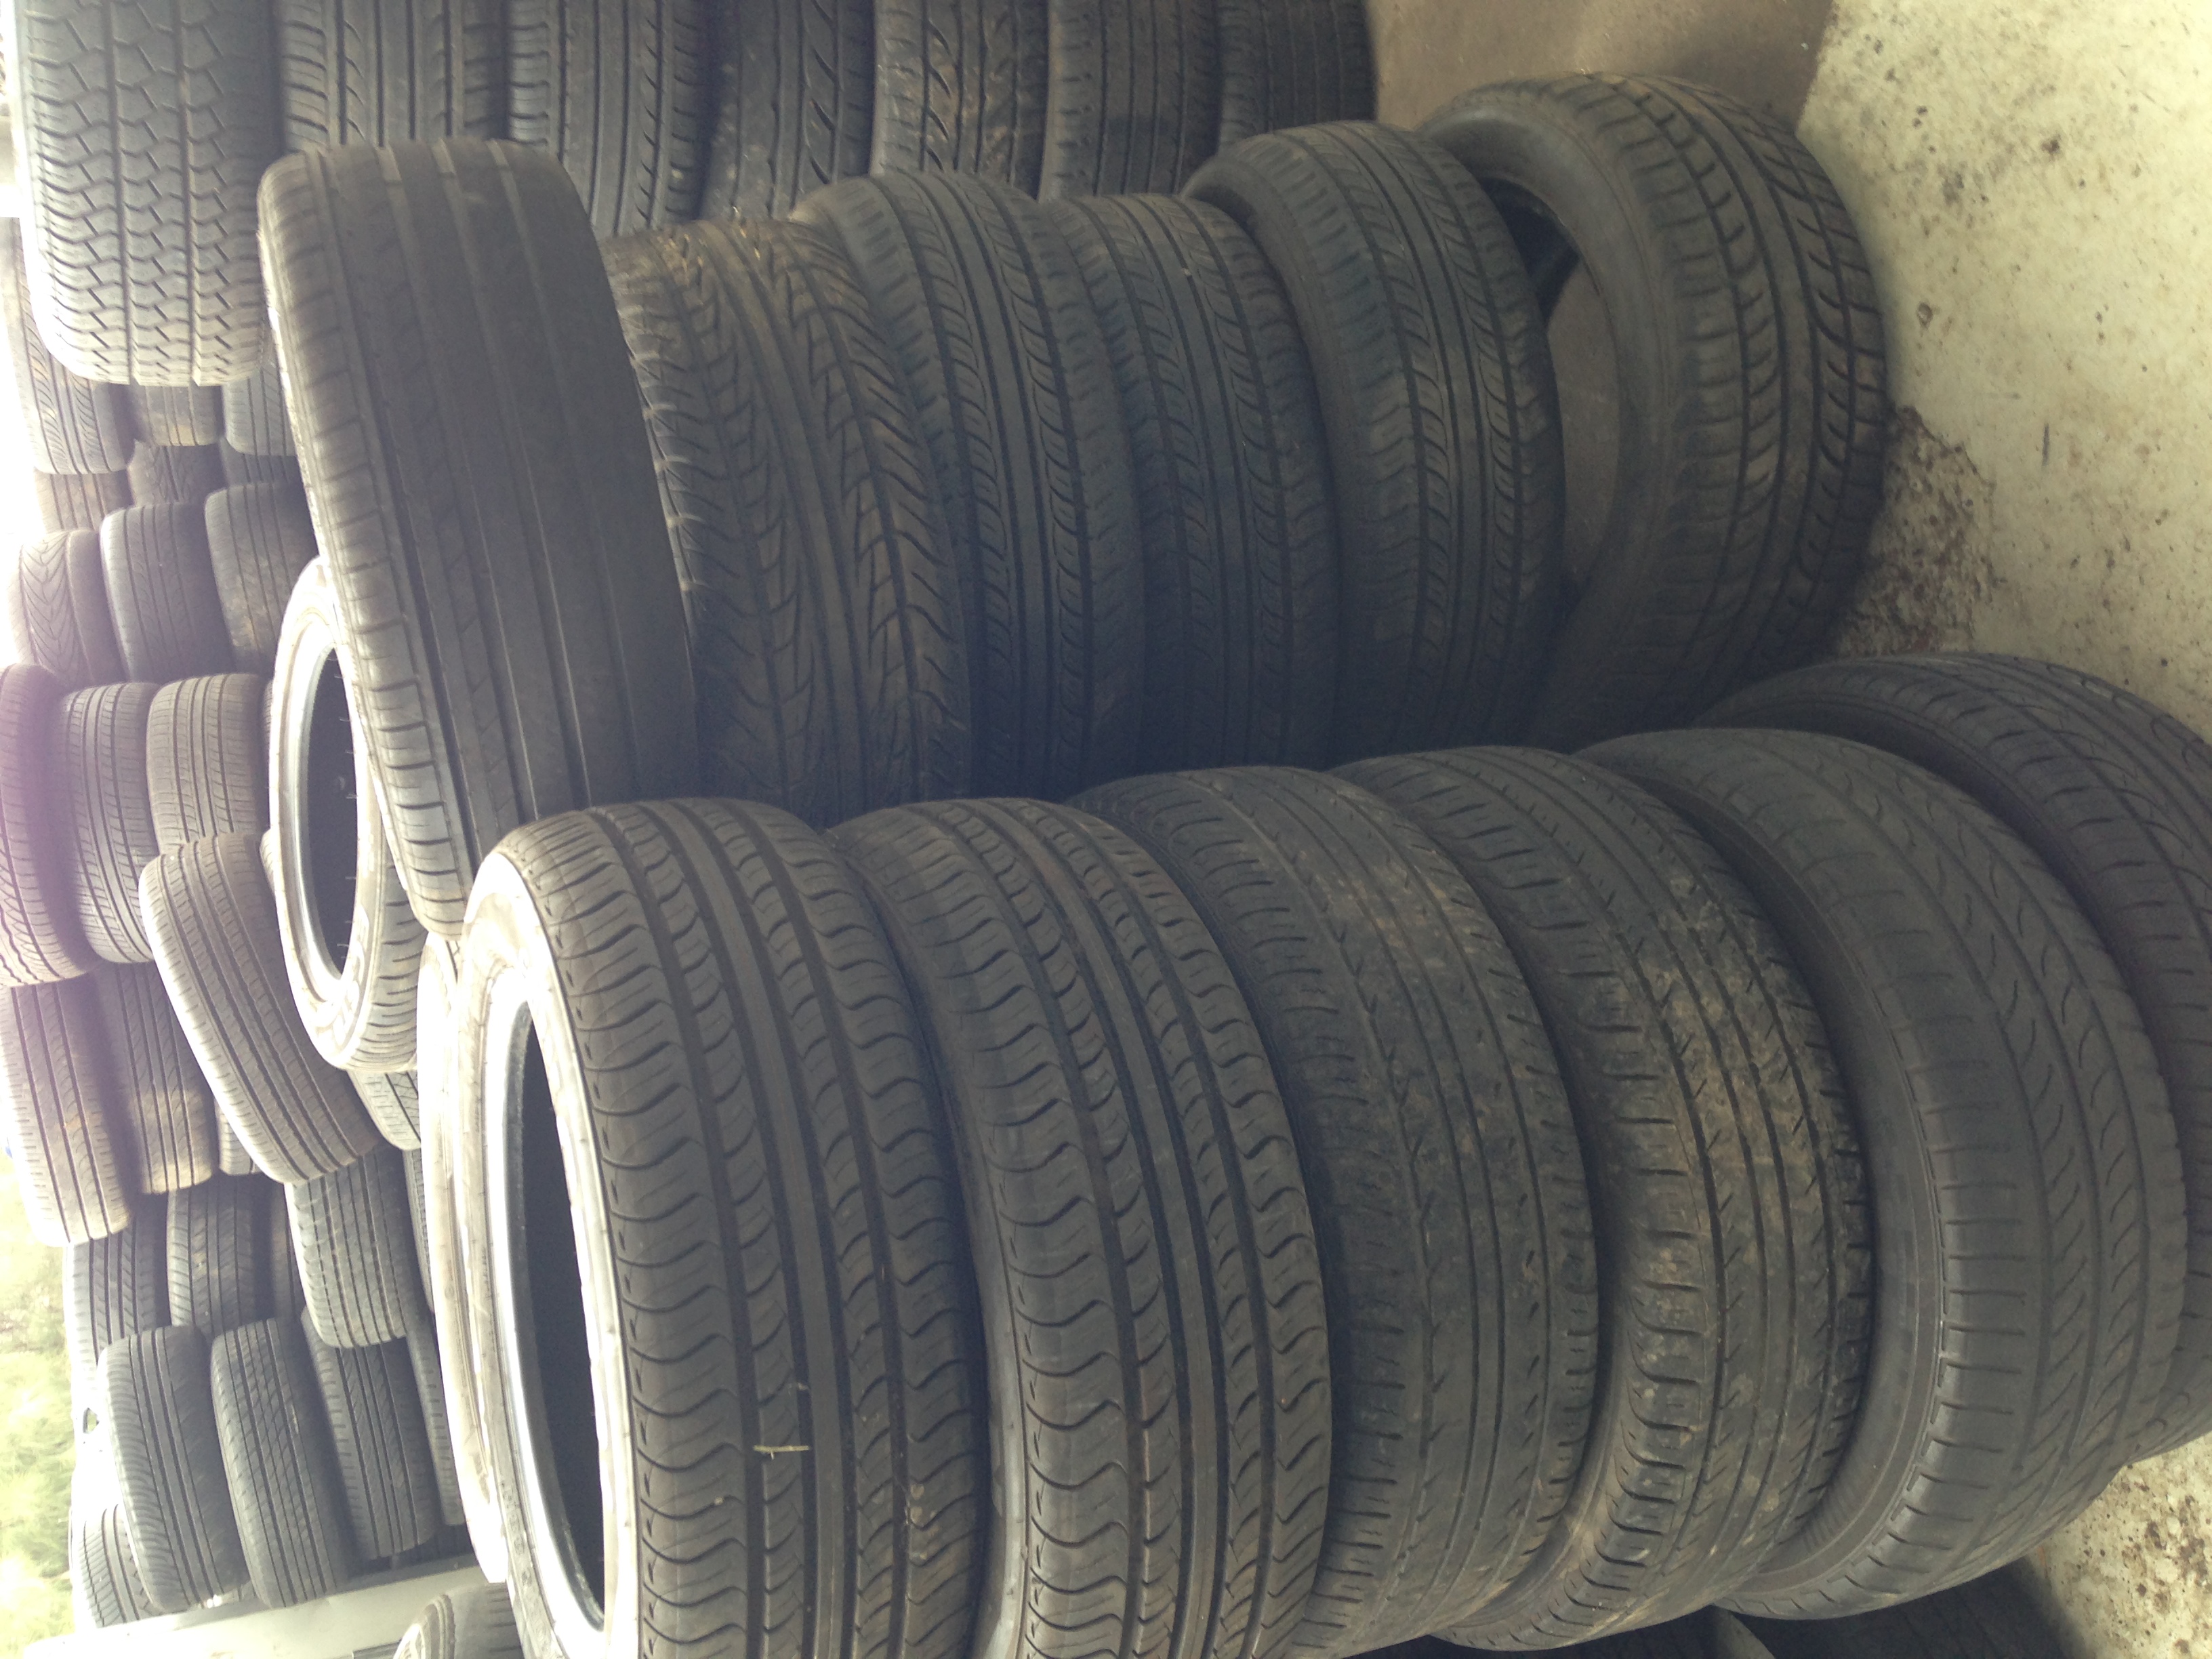 Stock of second hand and used car tyres shown. This includes used tyres for Toyota, Holden, Mitsubishi, Nissan, Ford, BMW and many other makes.